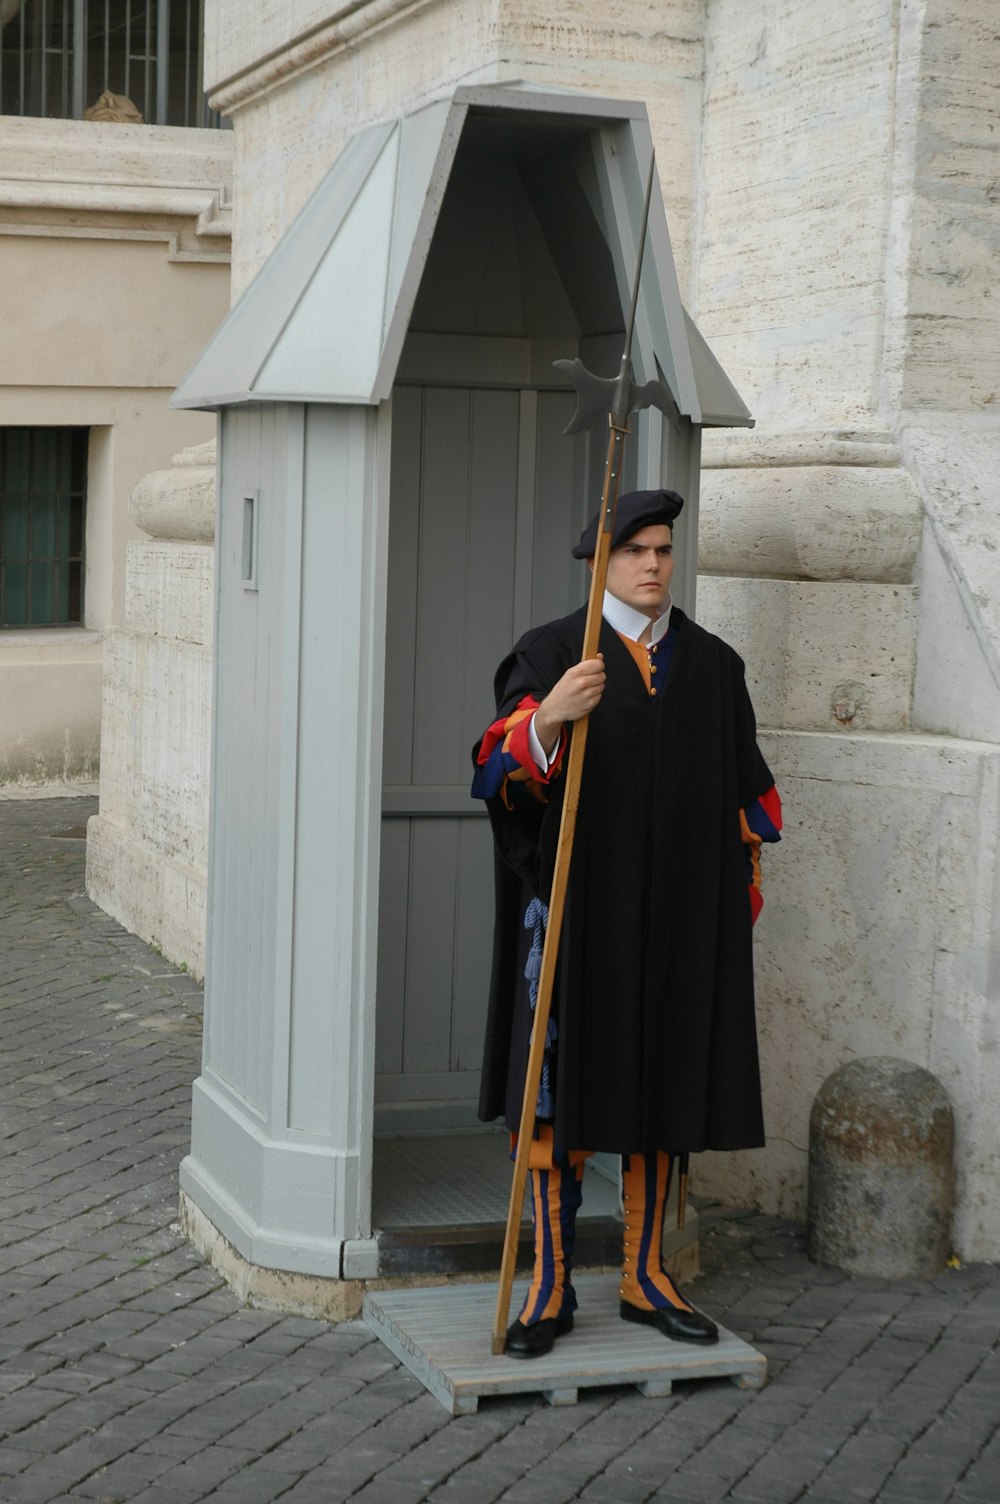 a statue of a man in a robe holding an umbrella